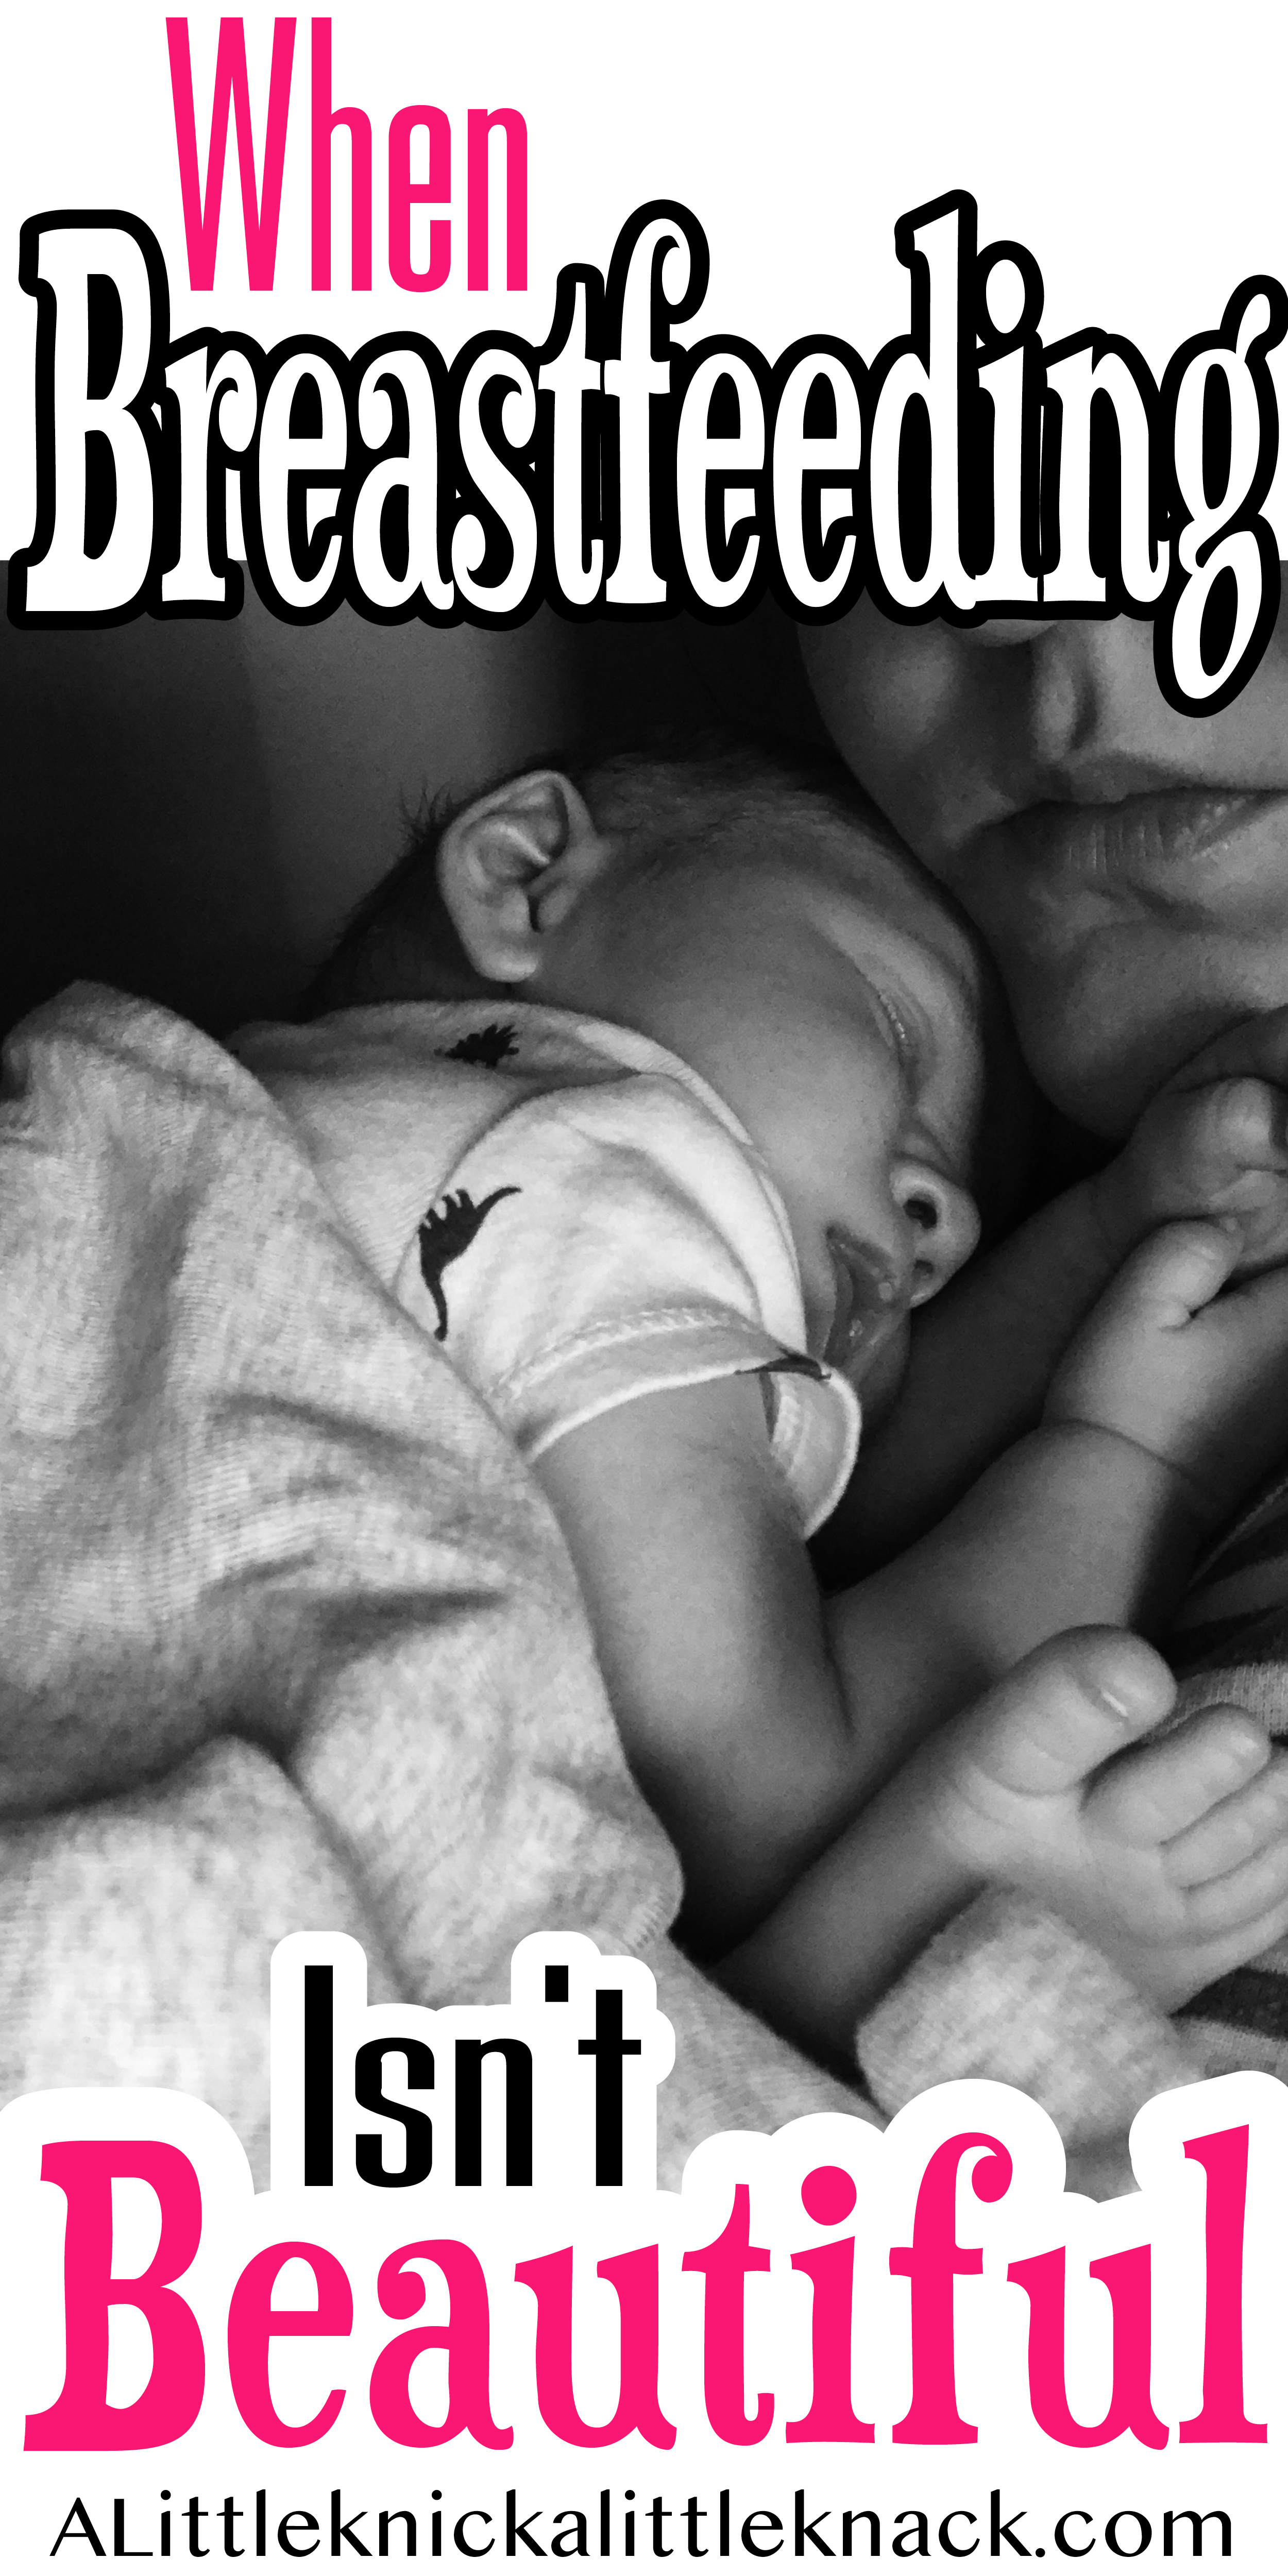 A black and white photo of a mother cradling a sleeping baby with a text overlay